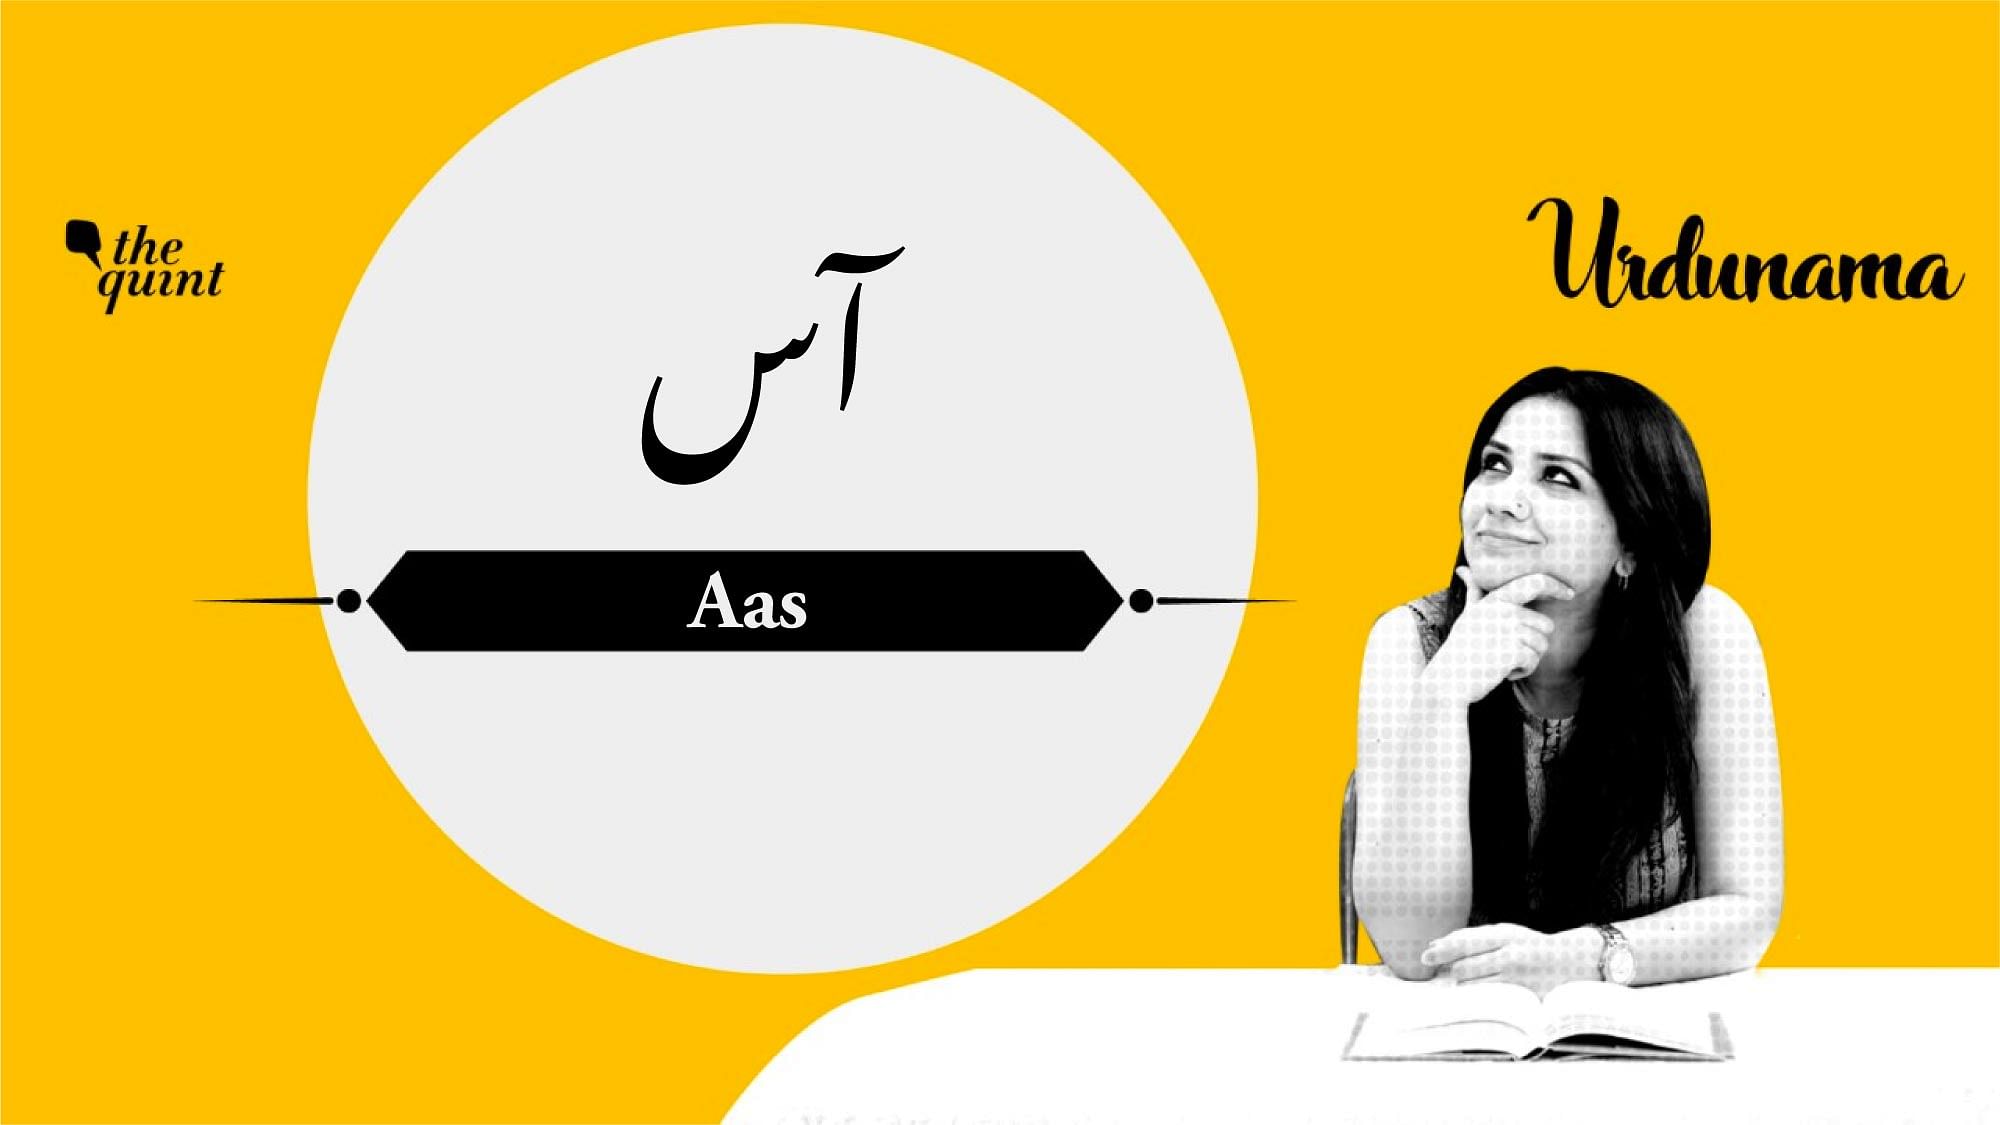 Through Urdu poetry, turn your feeling of despair and anxiety into hope, a new ‘aas’.